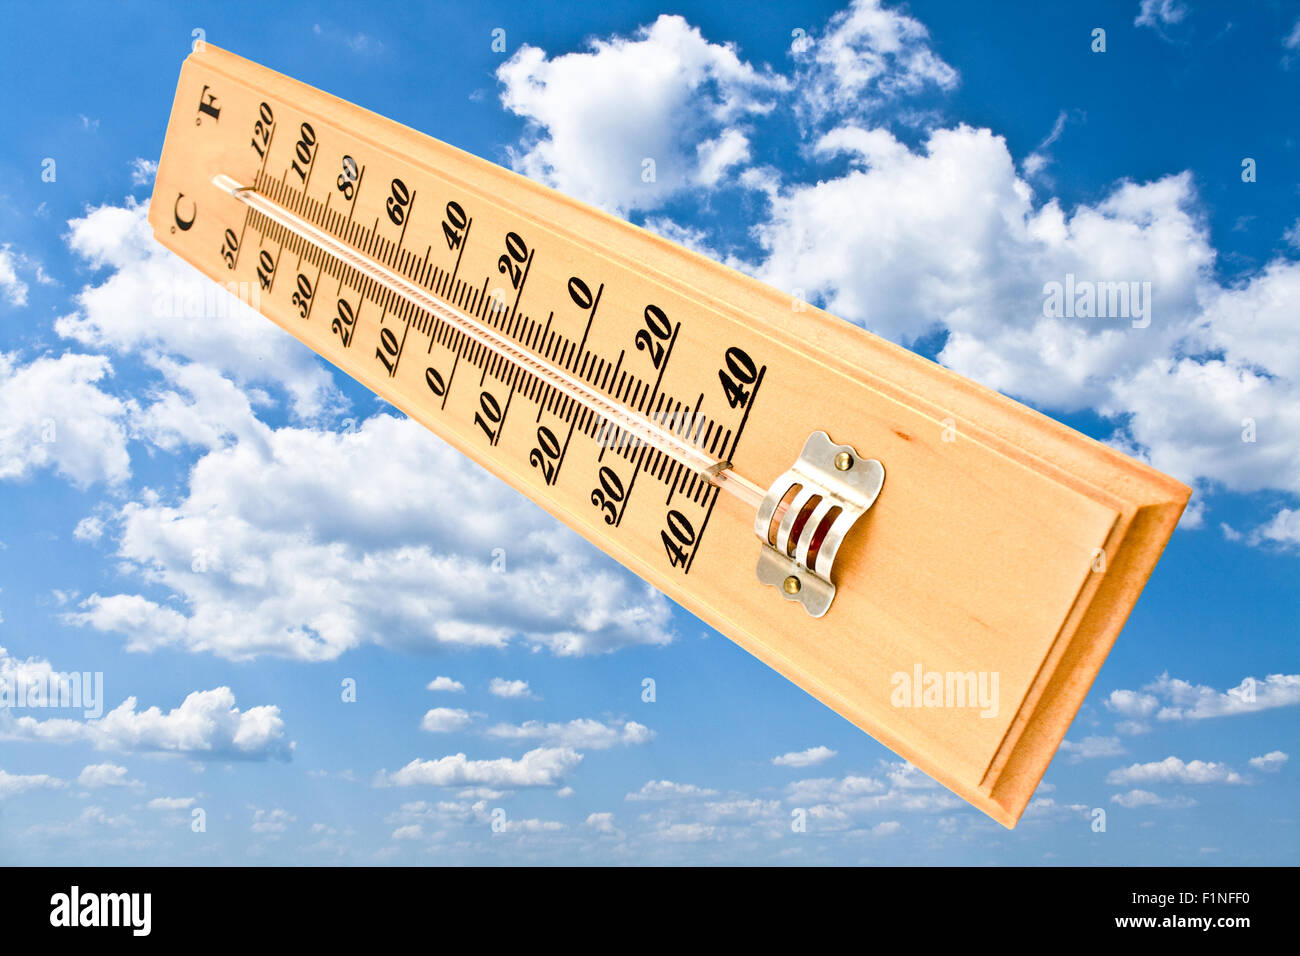 Wooden celsius fahrenheit thermometer over blue sky Stock Photo